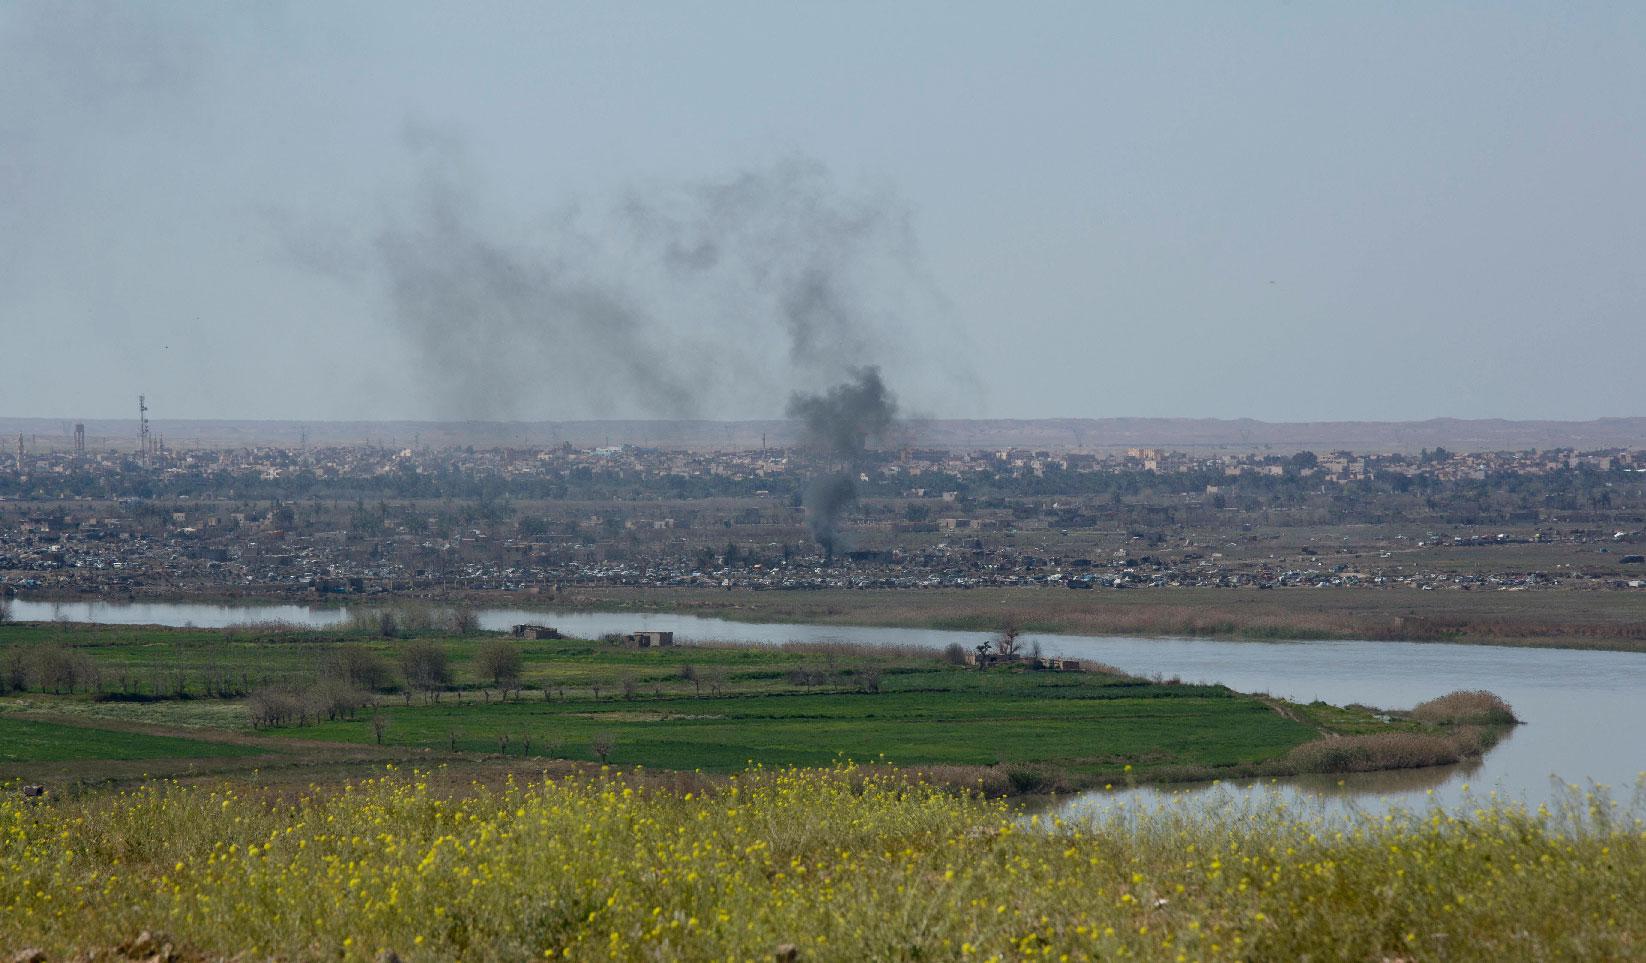 A column of smoke from operations by US-backed Syrian Democratic Forces (SDF) in Baghouz, the Islamic State group's last pocket of territory in Syria, Wednesday, March 20, 2019.